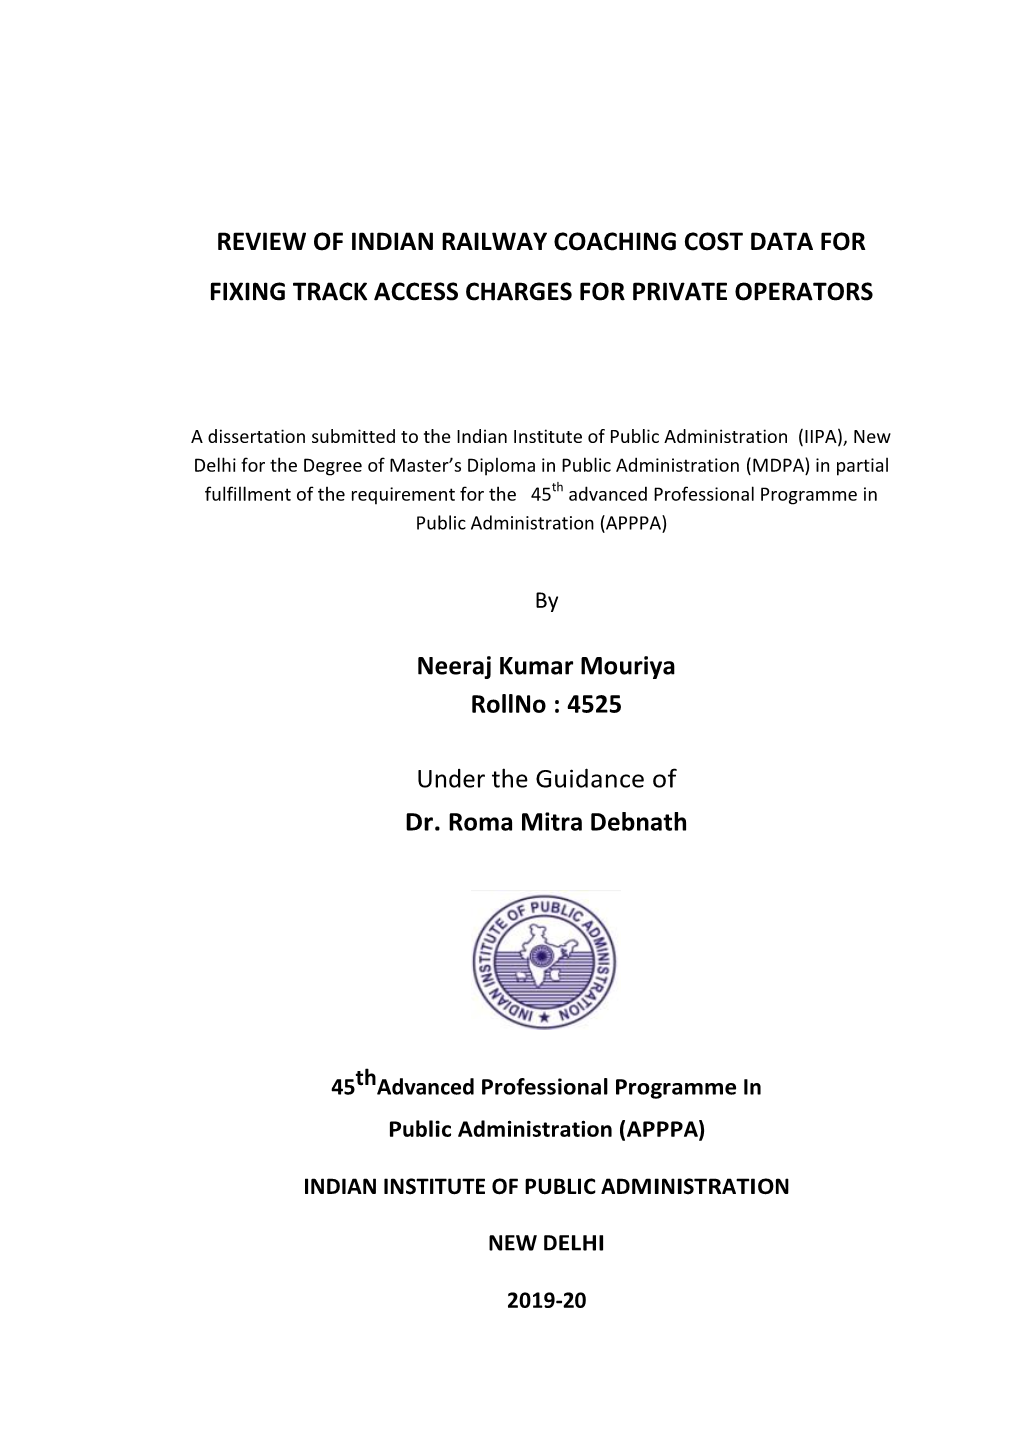 Review of Indian Railway Coaching Cost Data for Fixing Track Access Charges for Private Operators